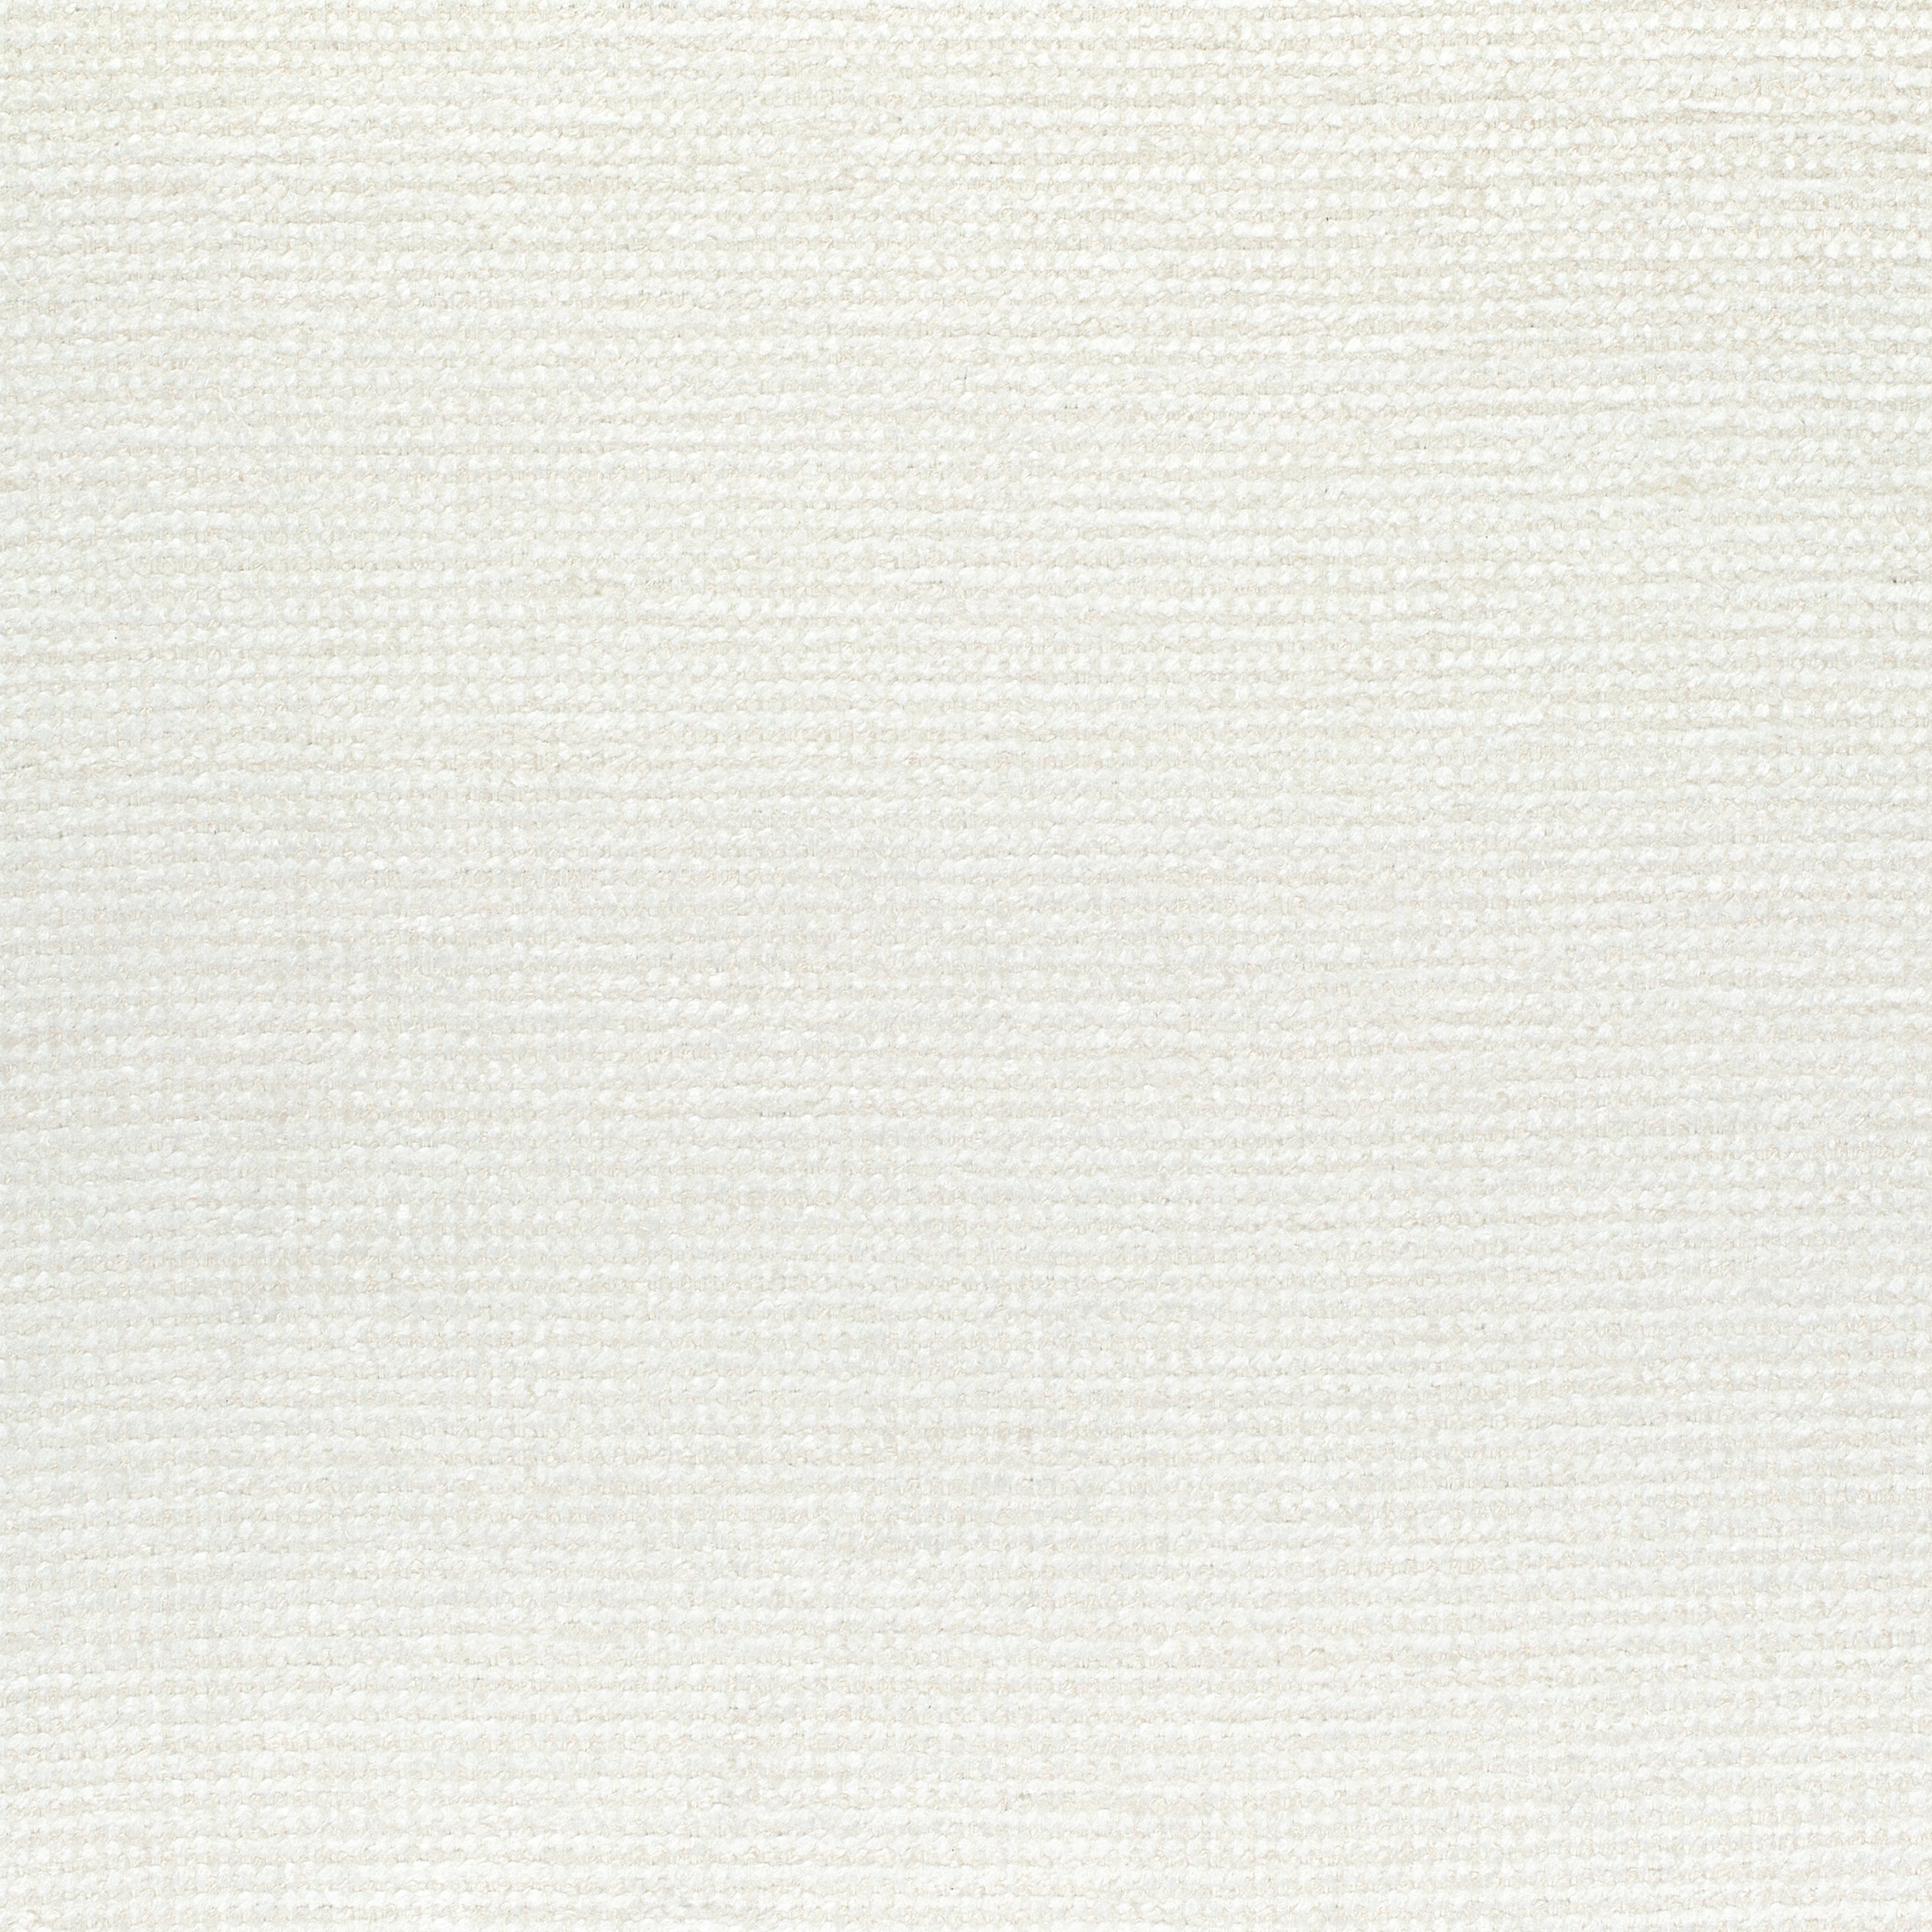 Milo fabric in almond color - pattern number W73318 - by Thibaut in the Nomad collection